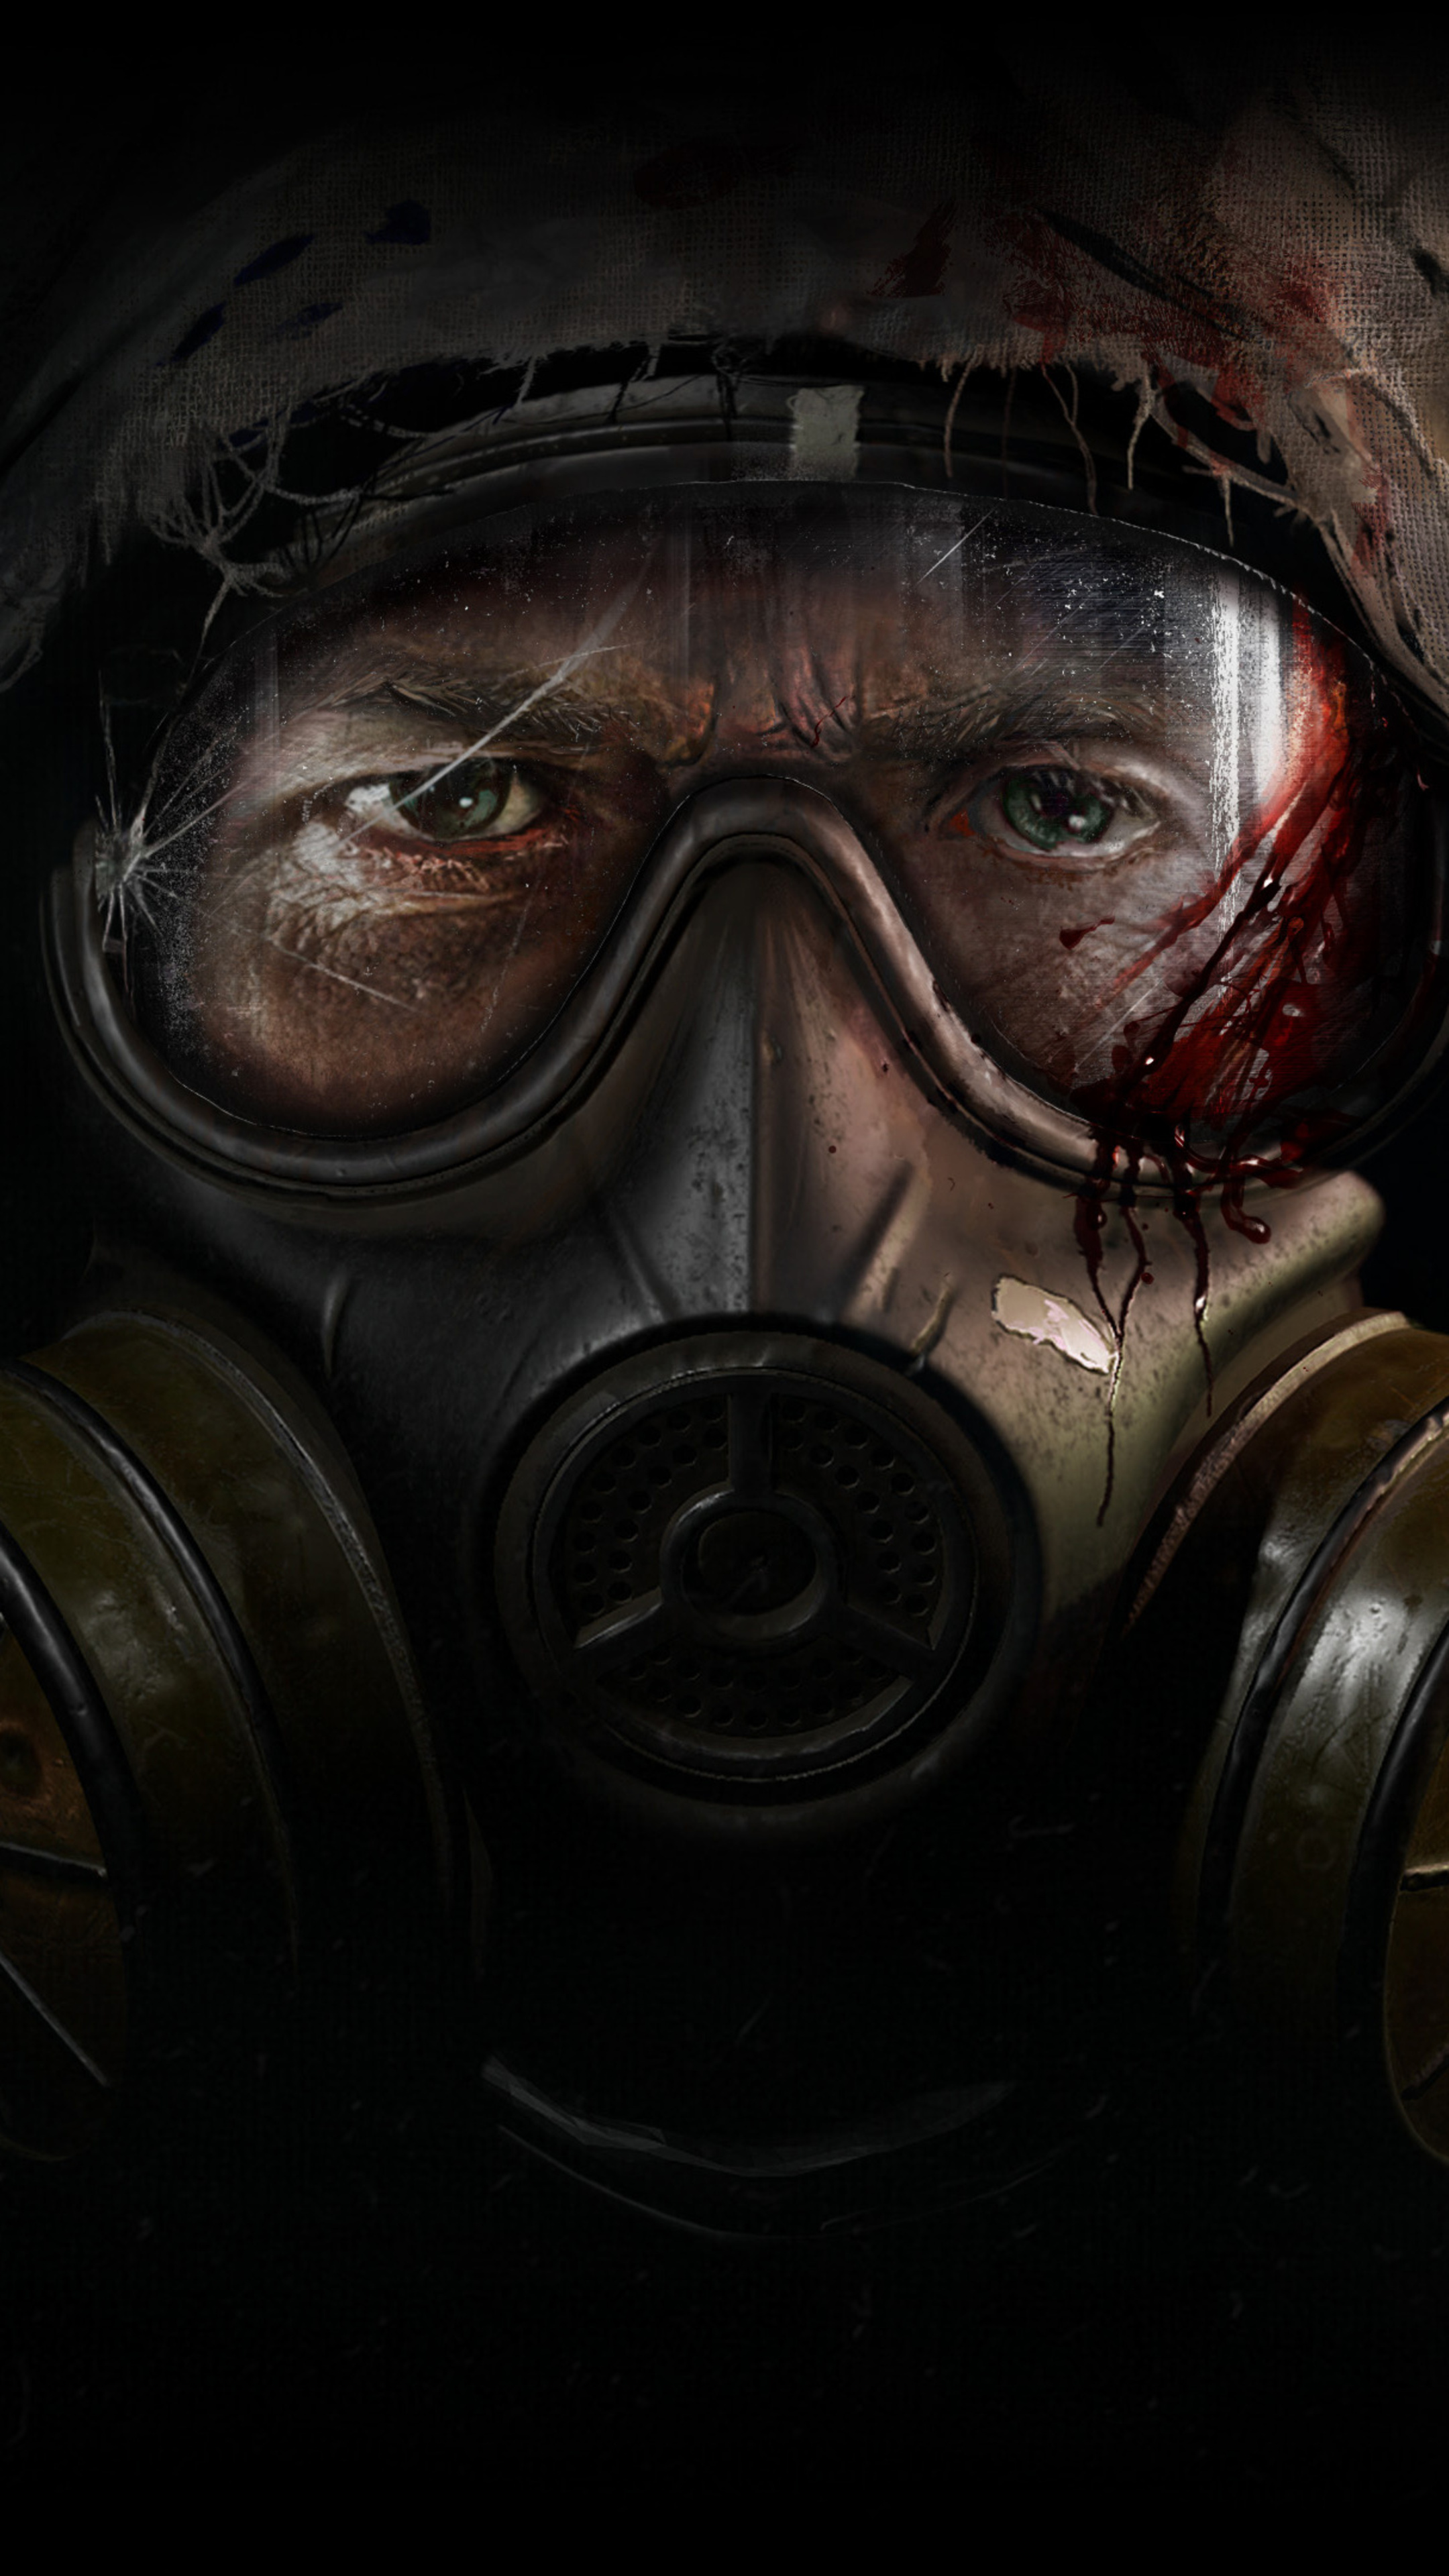 S.T.A.L.K.E.R. 2: Skif, The main playable character in the upcoming action shooter video game. 2160x3840 4K Wallpaper.